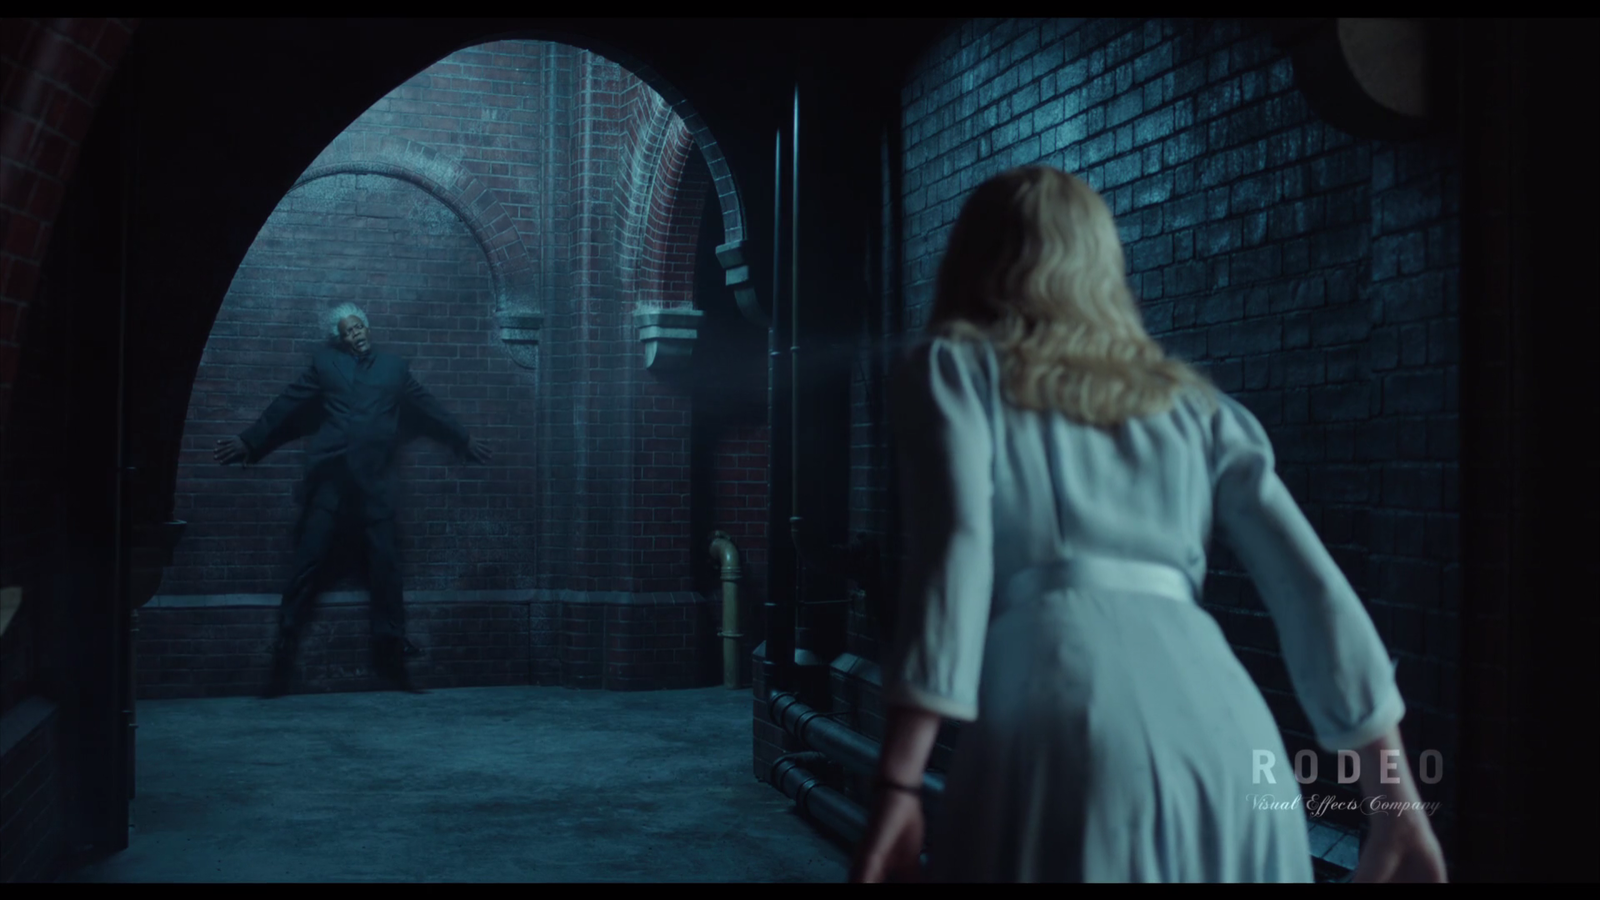 Special effects from Miss Peregrine's Home for Peculiar Children - Movies, House of Peculiar Children, Special effects, Ella Purnell, Asa Butterfield, Samuel L Jackson, Before and after VFX, GIF, Longpost